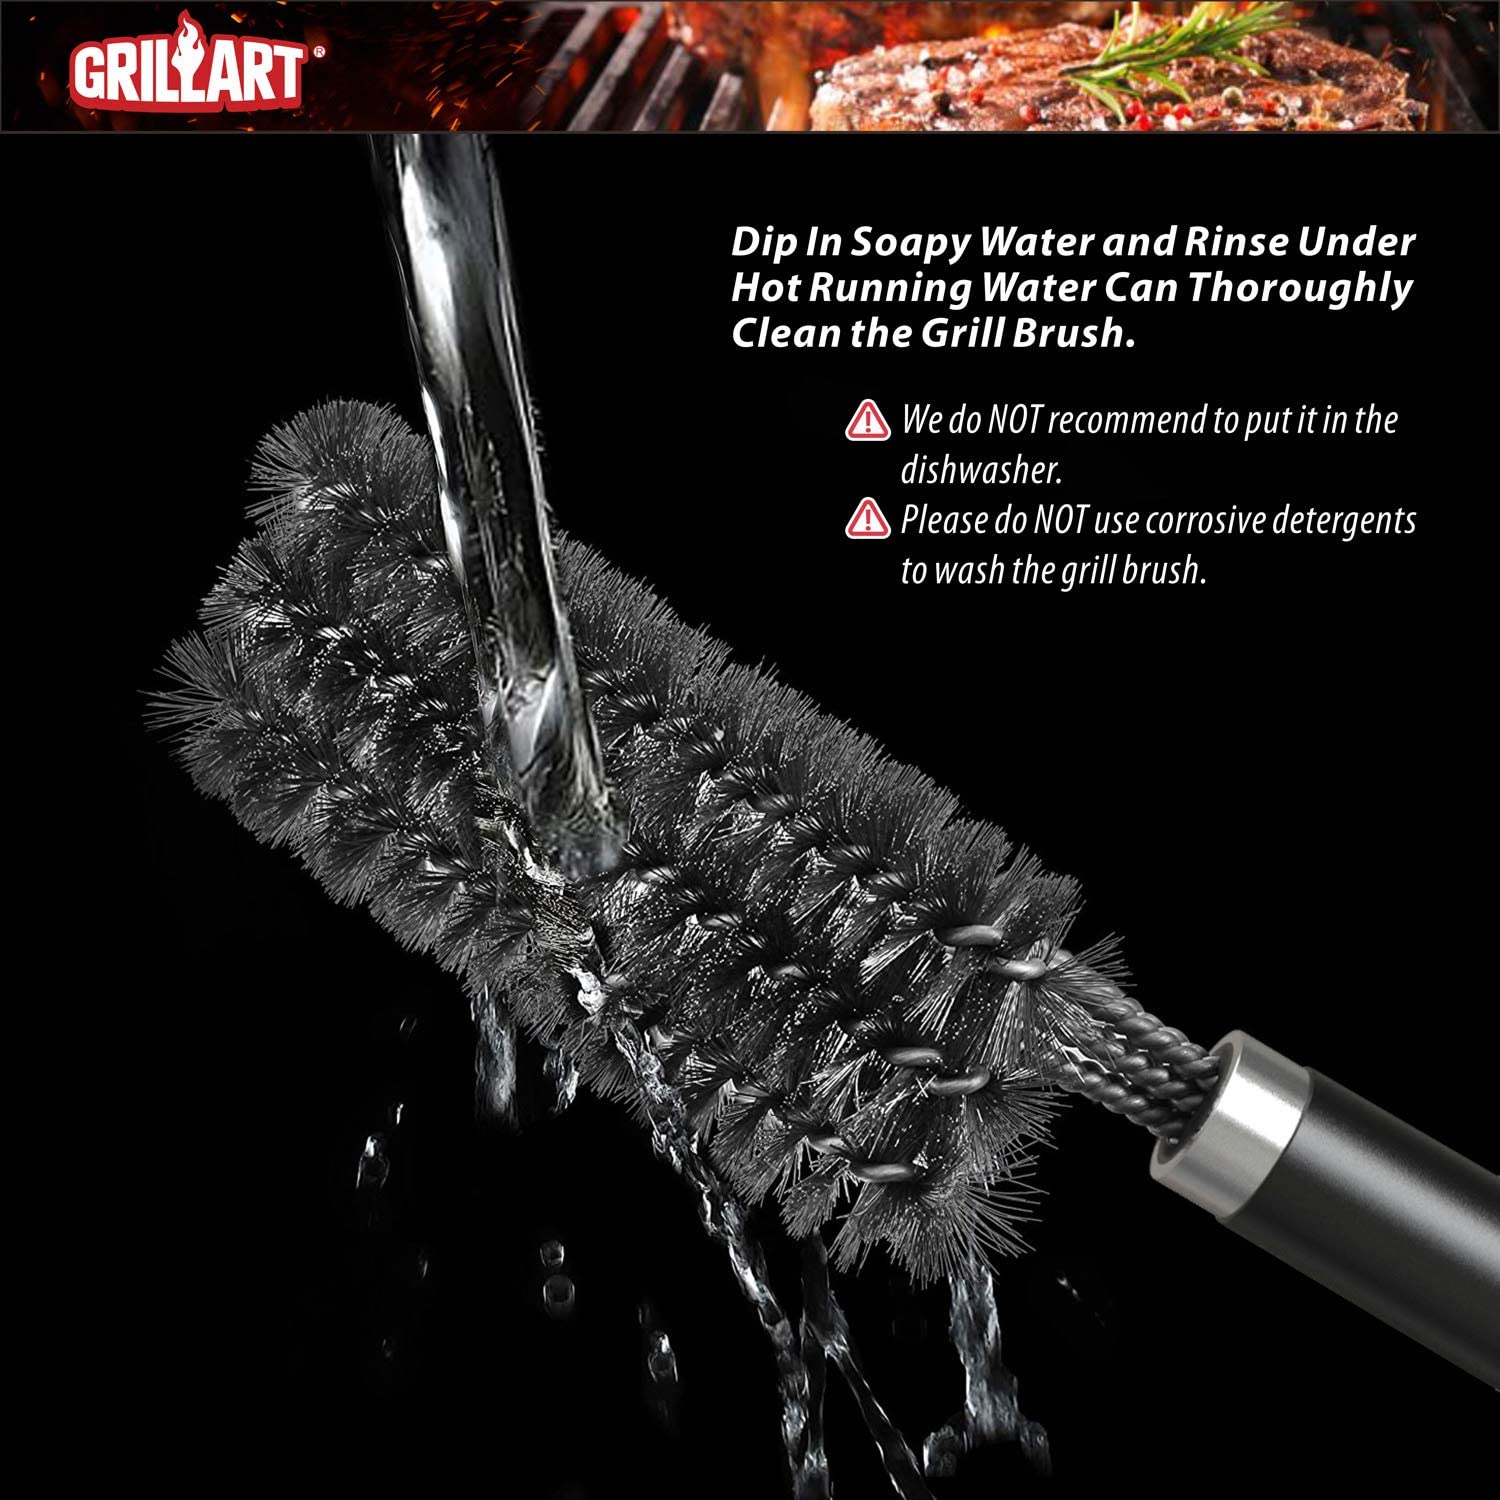 GRILLART Grill Brush and Scraper - Extra Strong BBQ Cleaner